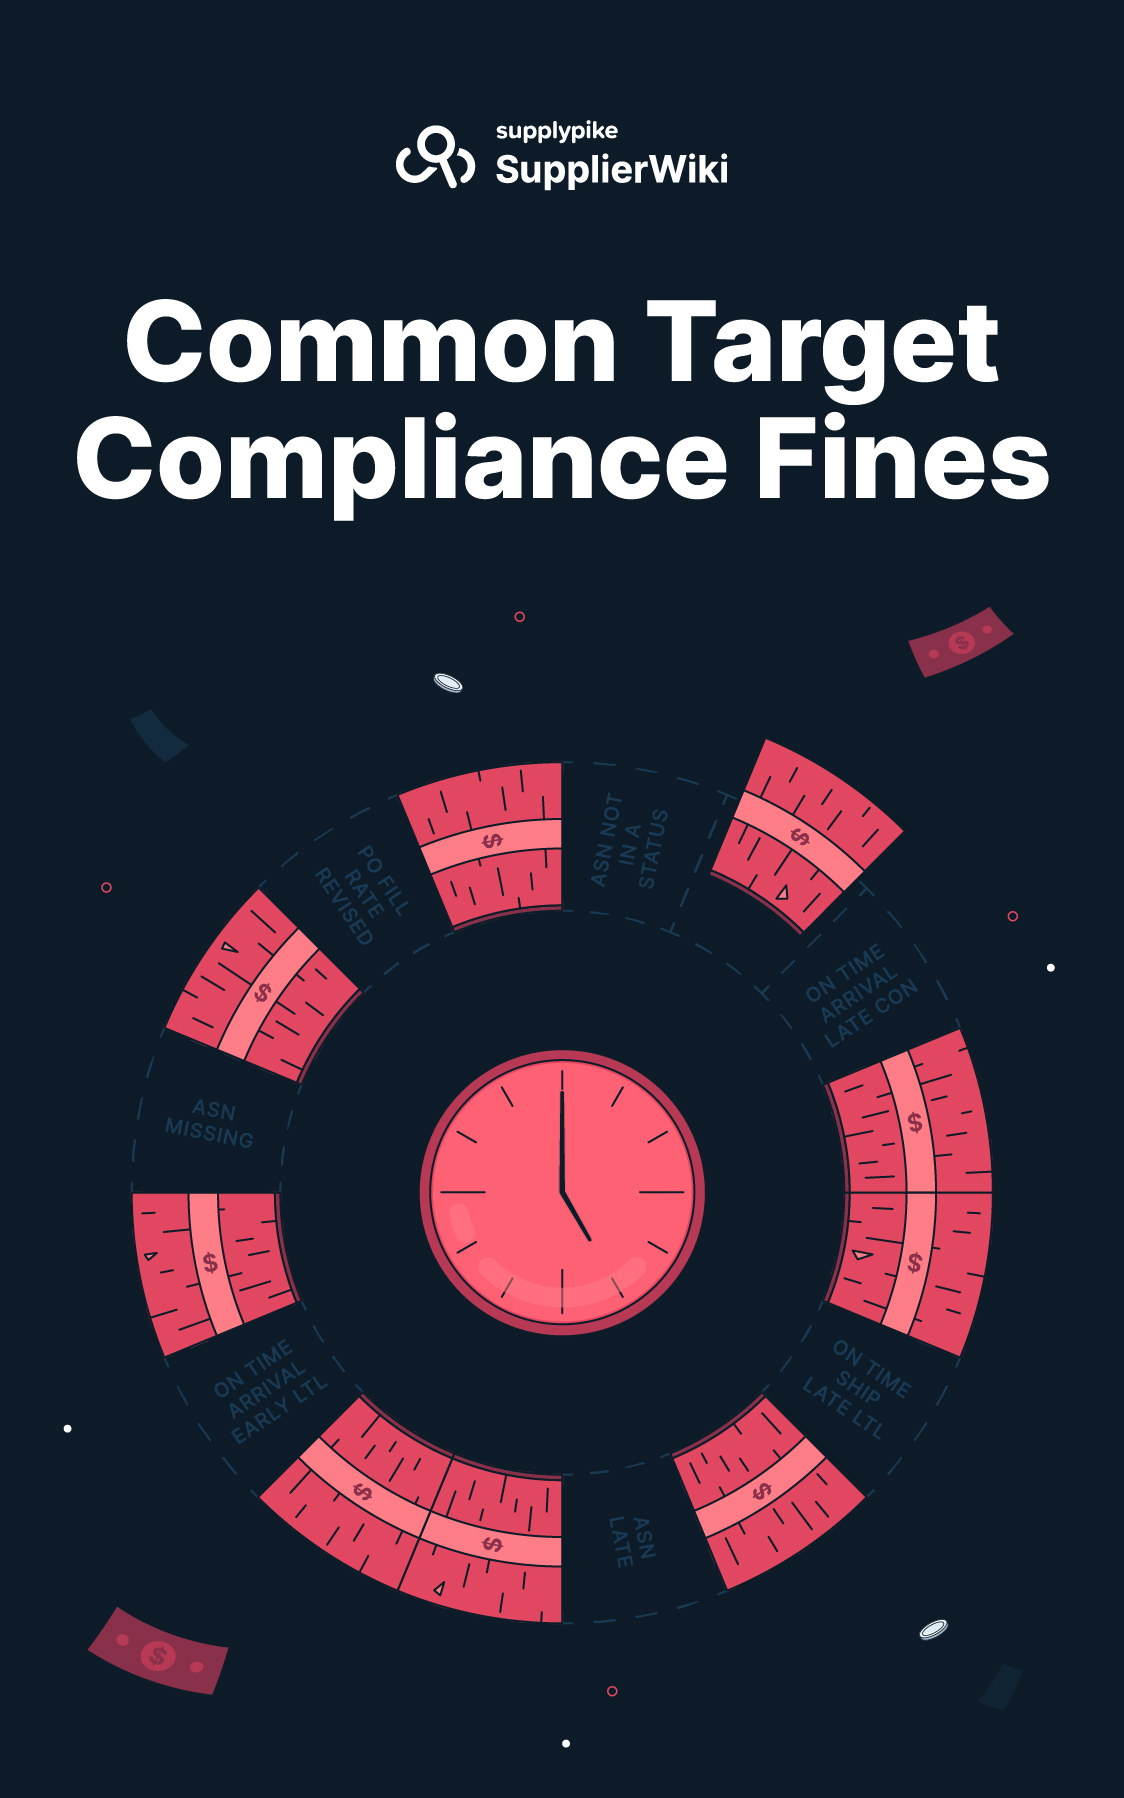 Common Target Compliance Fines